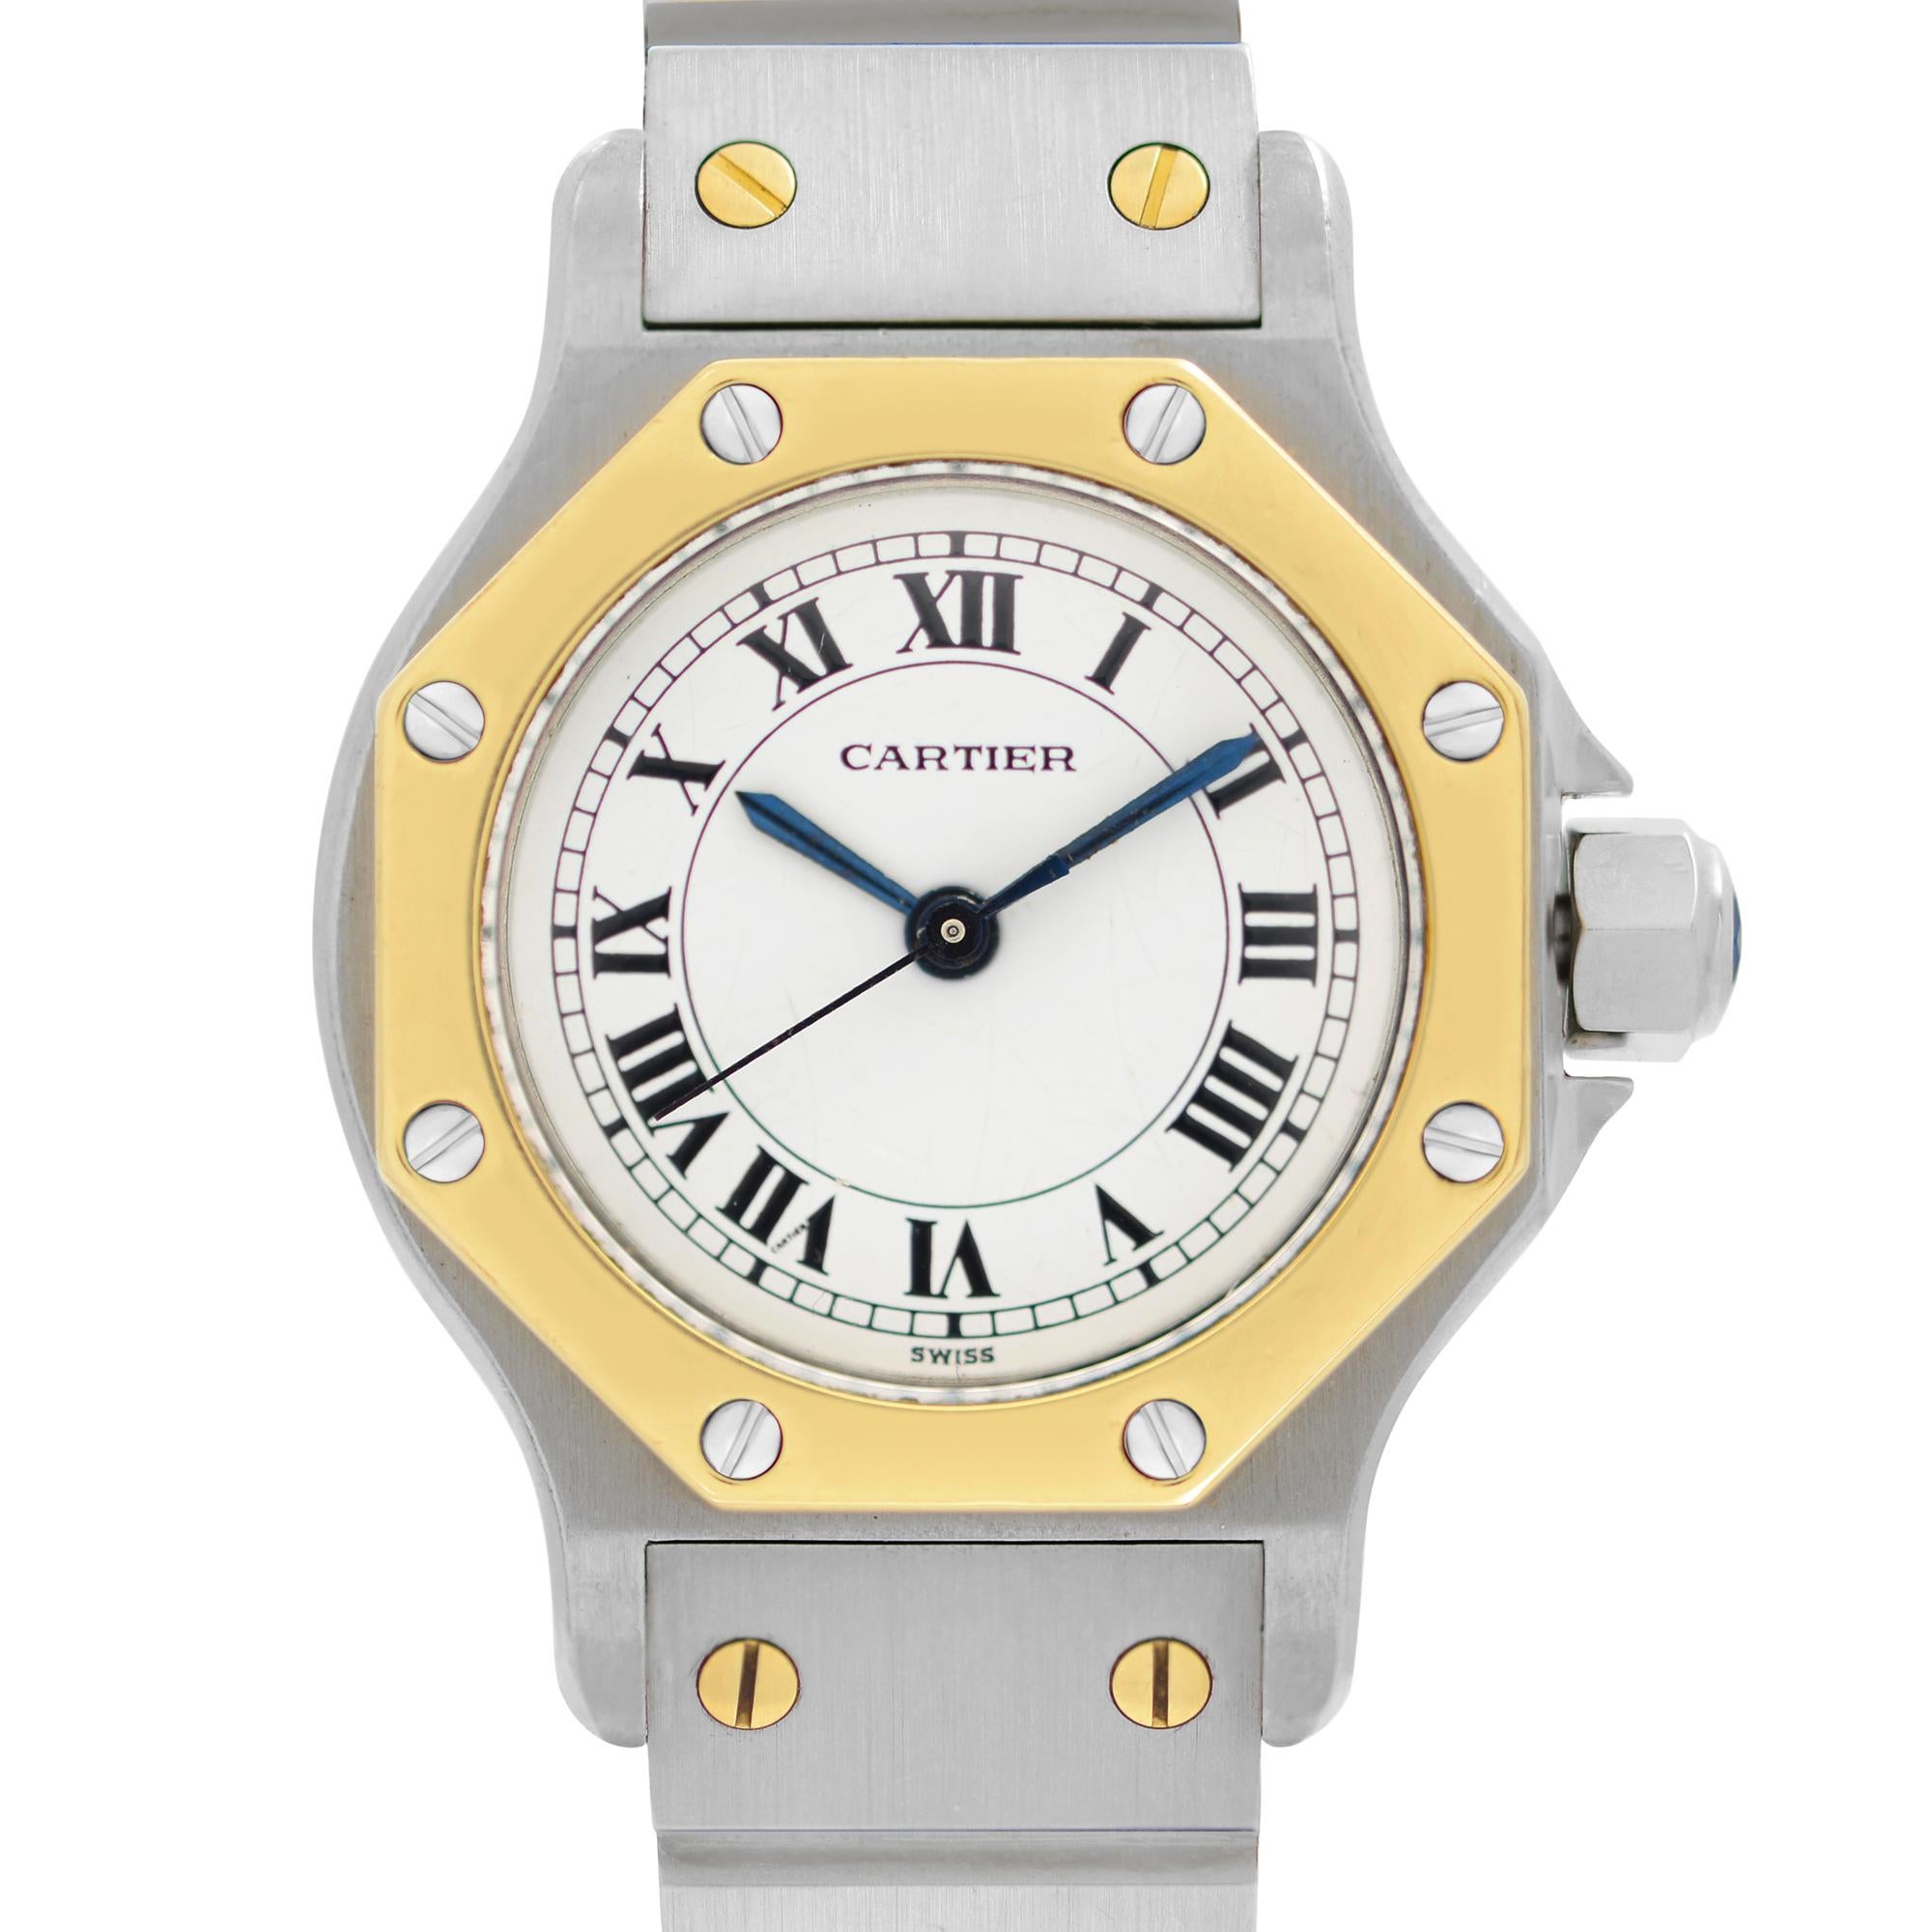 Pre-owned Vintage Cartier 0907 Santos Octagon Steel Yellow Gold Automatic Ladies Watch. Dial Shows Some Hairline Cracks Due to Age and Minutes and Hour Hands have minor patina as Seen in the Pictures. No Original Box and Papers are Included. Comes